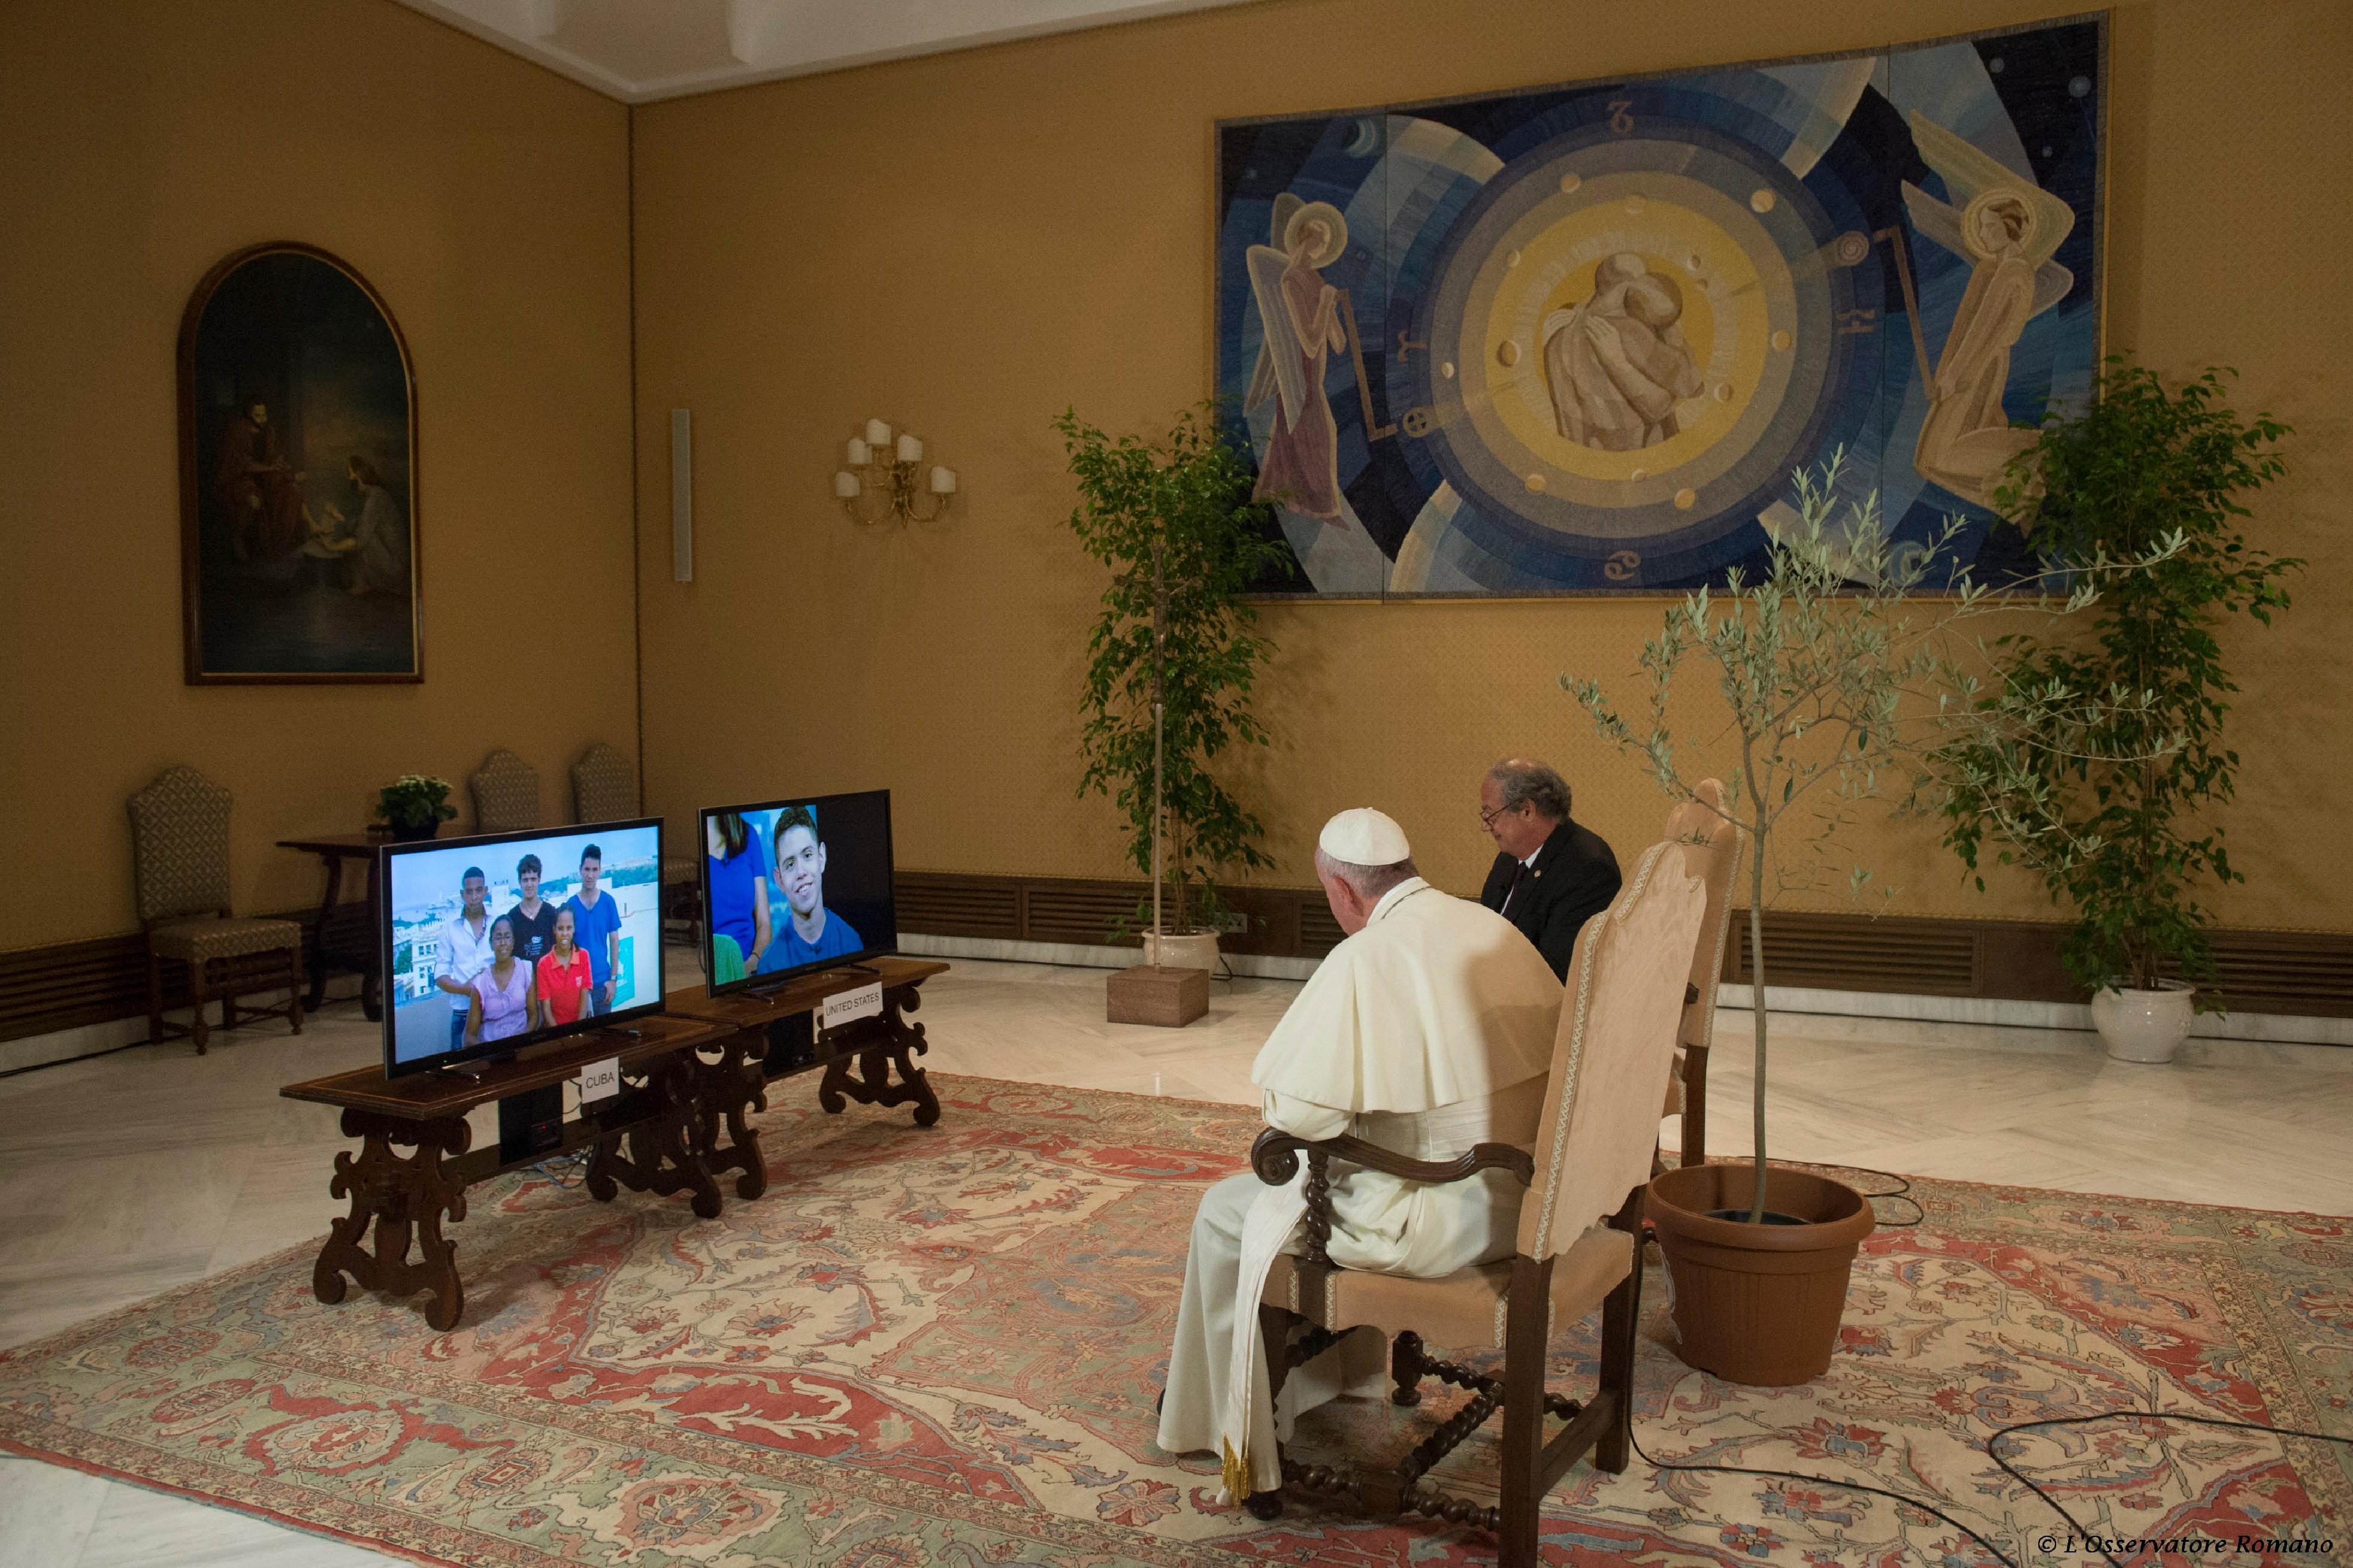 Pope Francis responds from the Vatican to questions from students in Cuba and USA during a CNN teleconference